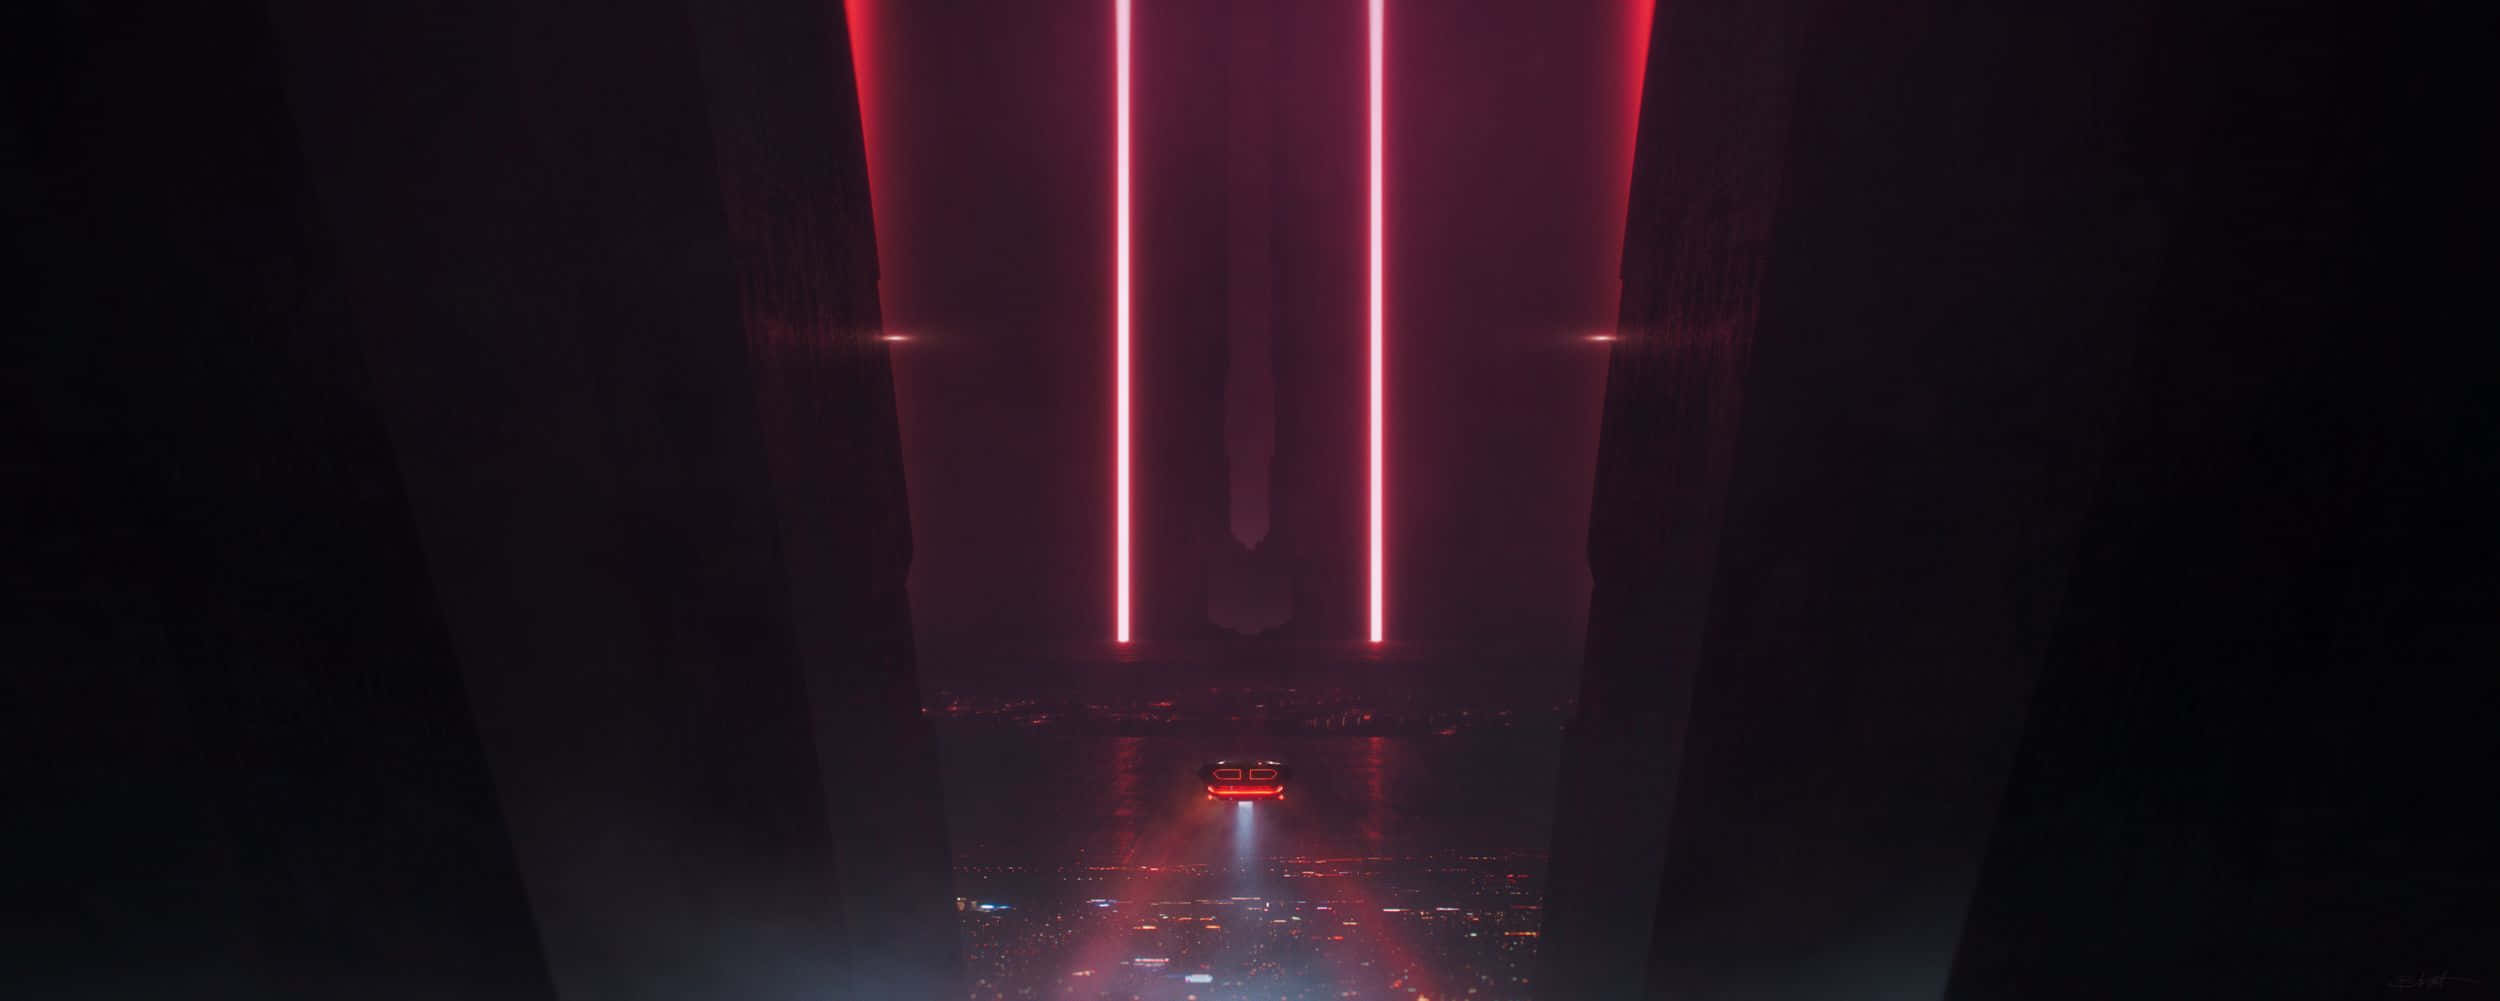 "Explore the future of humanity in Blade Runner 2049"